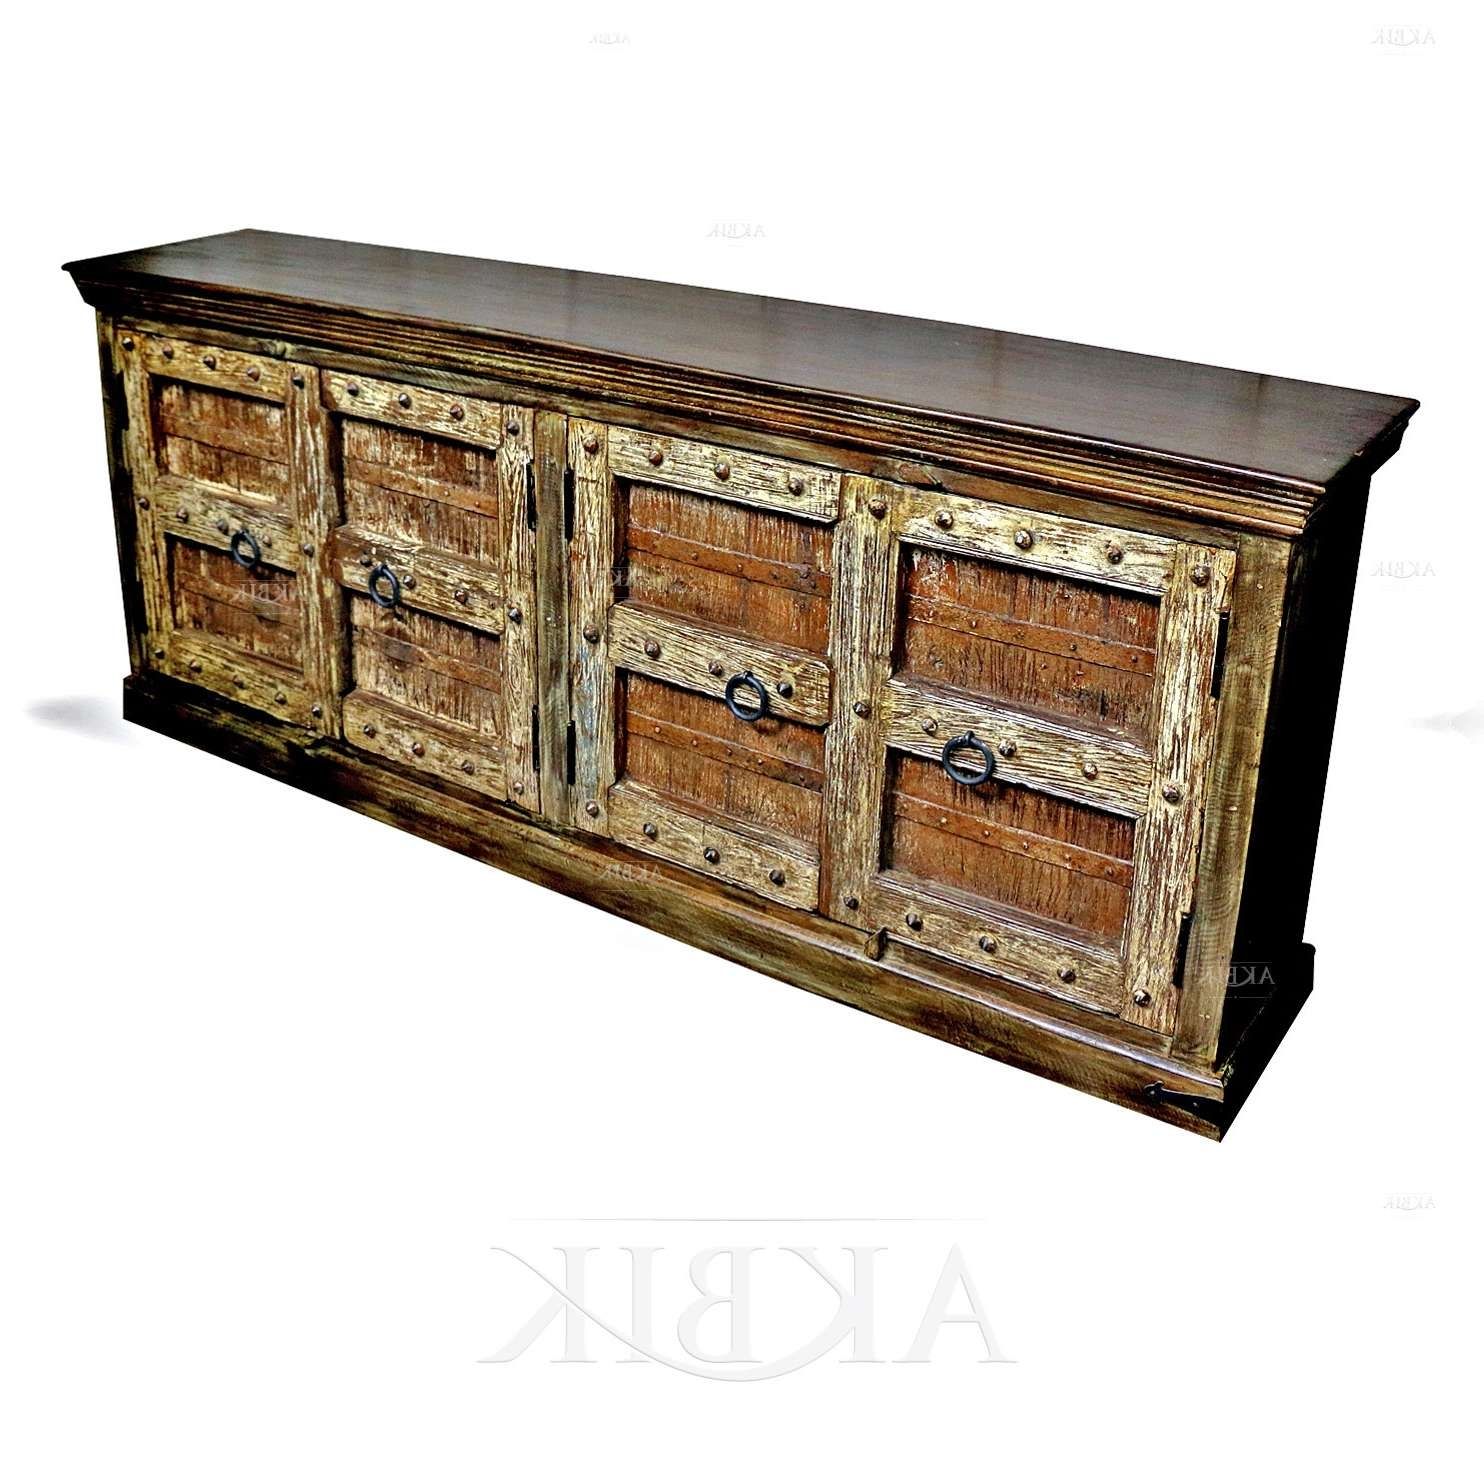 Mediterranean, Levantine & Syrian Furniture Inlaid With Mother Of Pertaining To Indian Sideboards Furniture (View 9 of 20)